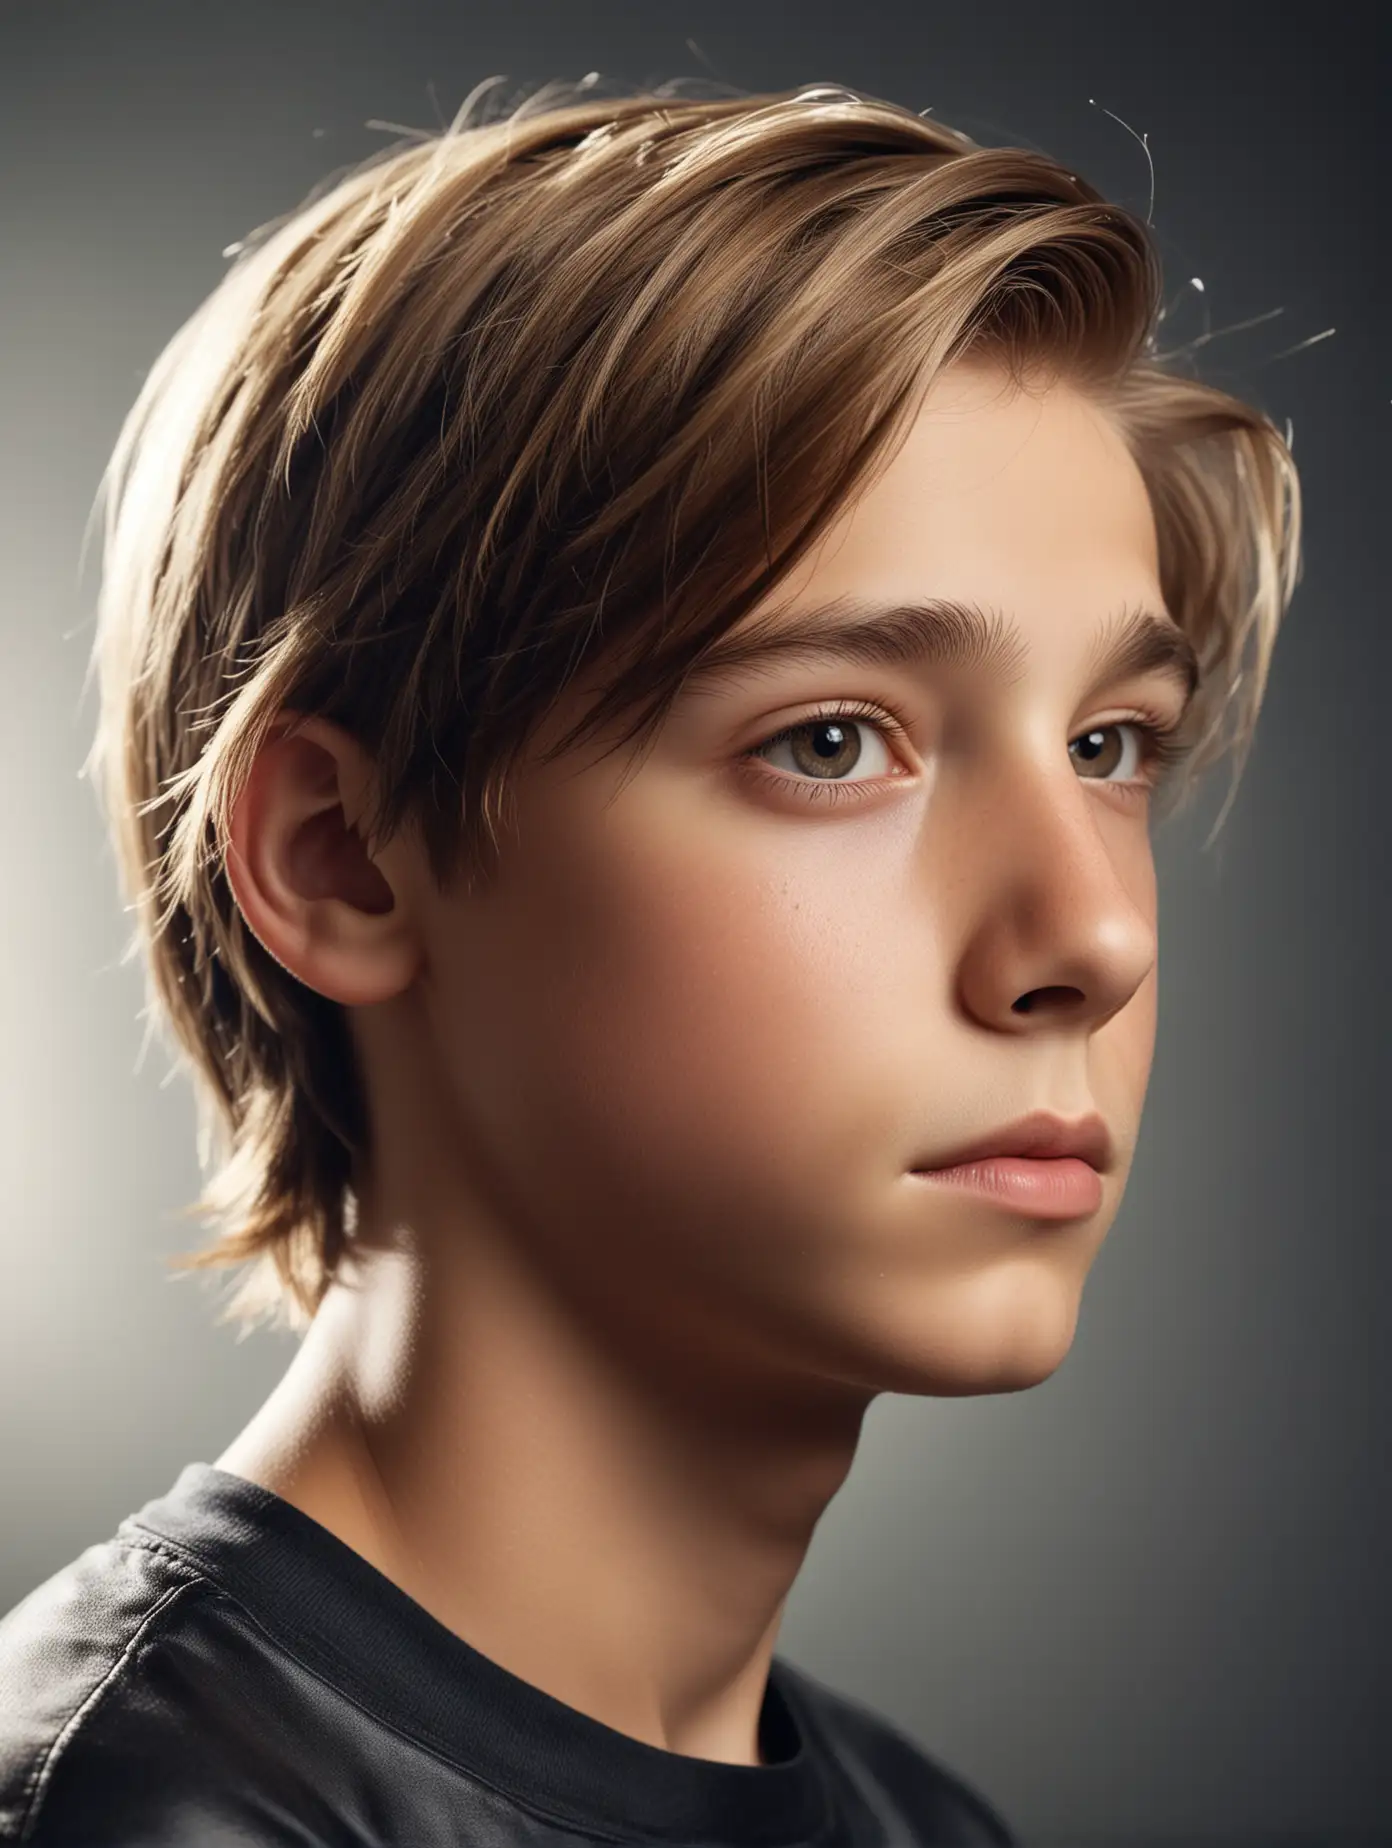 Hyper realistic photo of thirteen year old boy, close up smooth, shiny hair, parted on side, profile view, bright light overhead,  